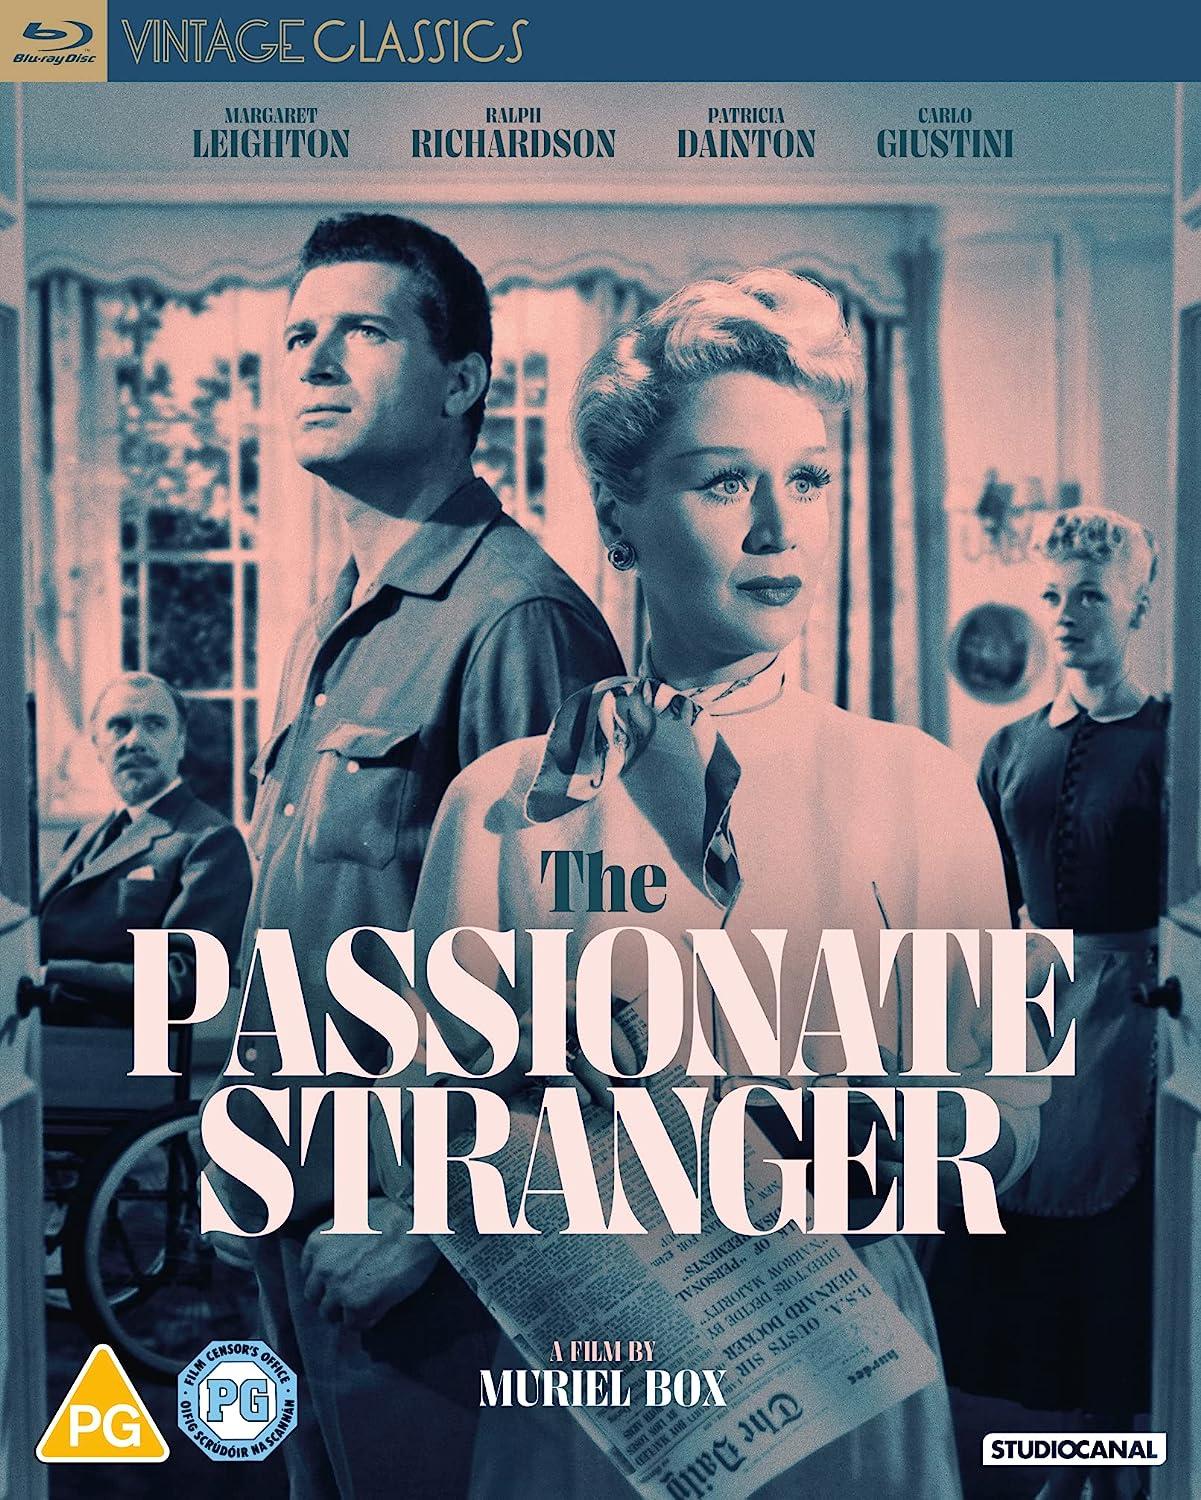 The Passionate Stranger (1957) Blu-ray cover from Studio Canal [2023] (1) featuring Carlo Giustini and Margaret Leighton